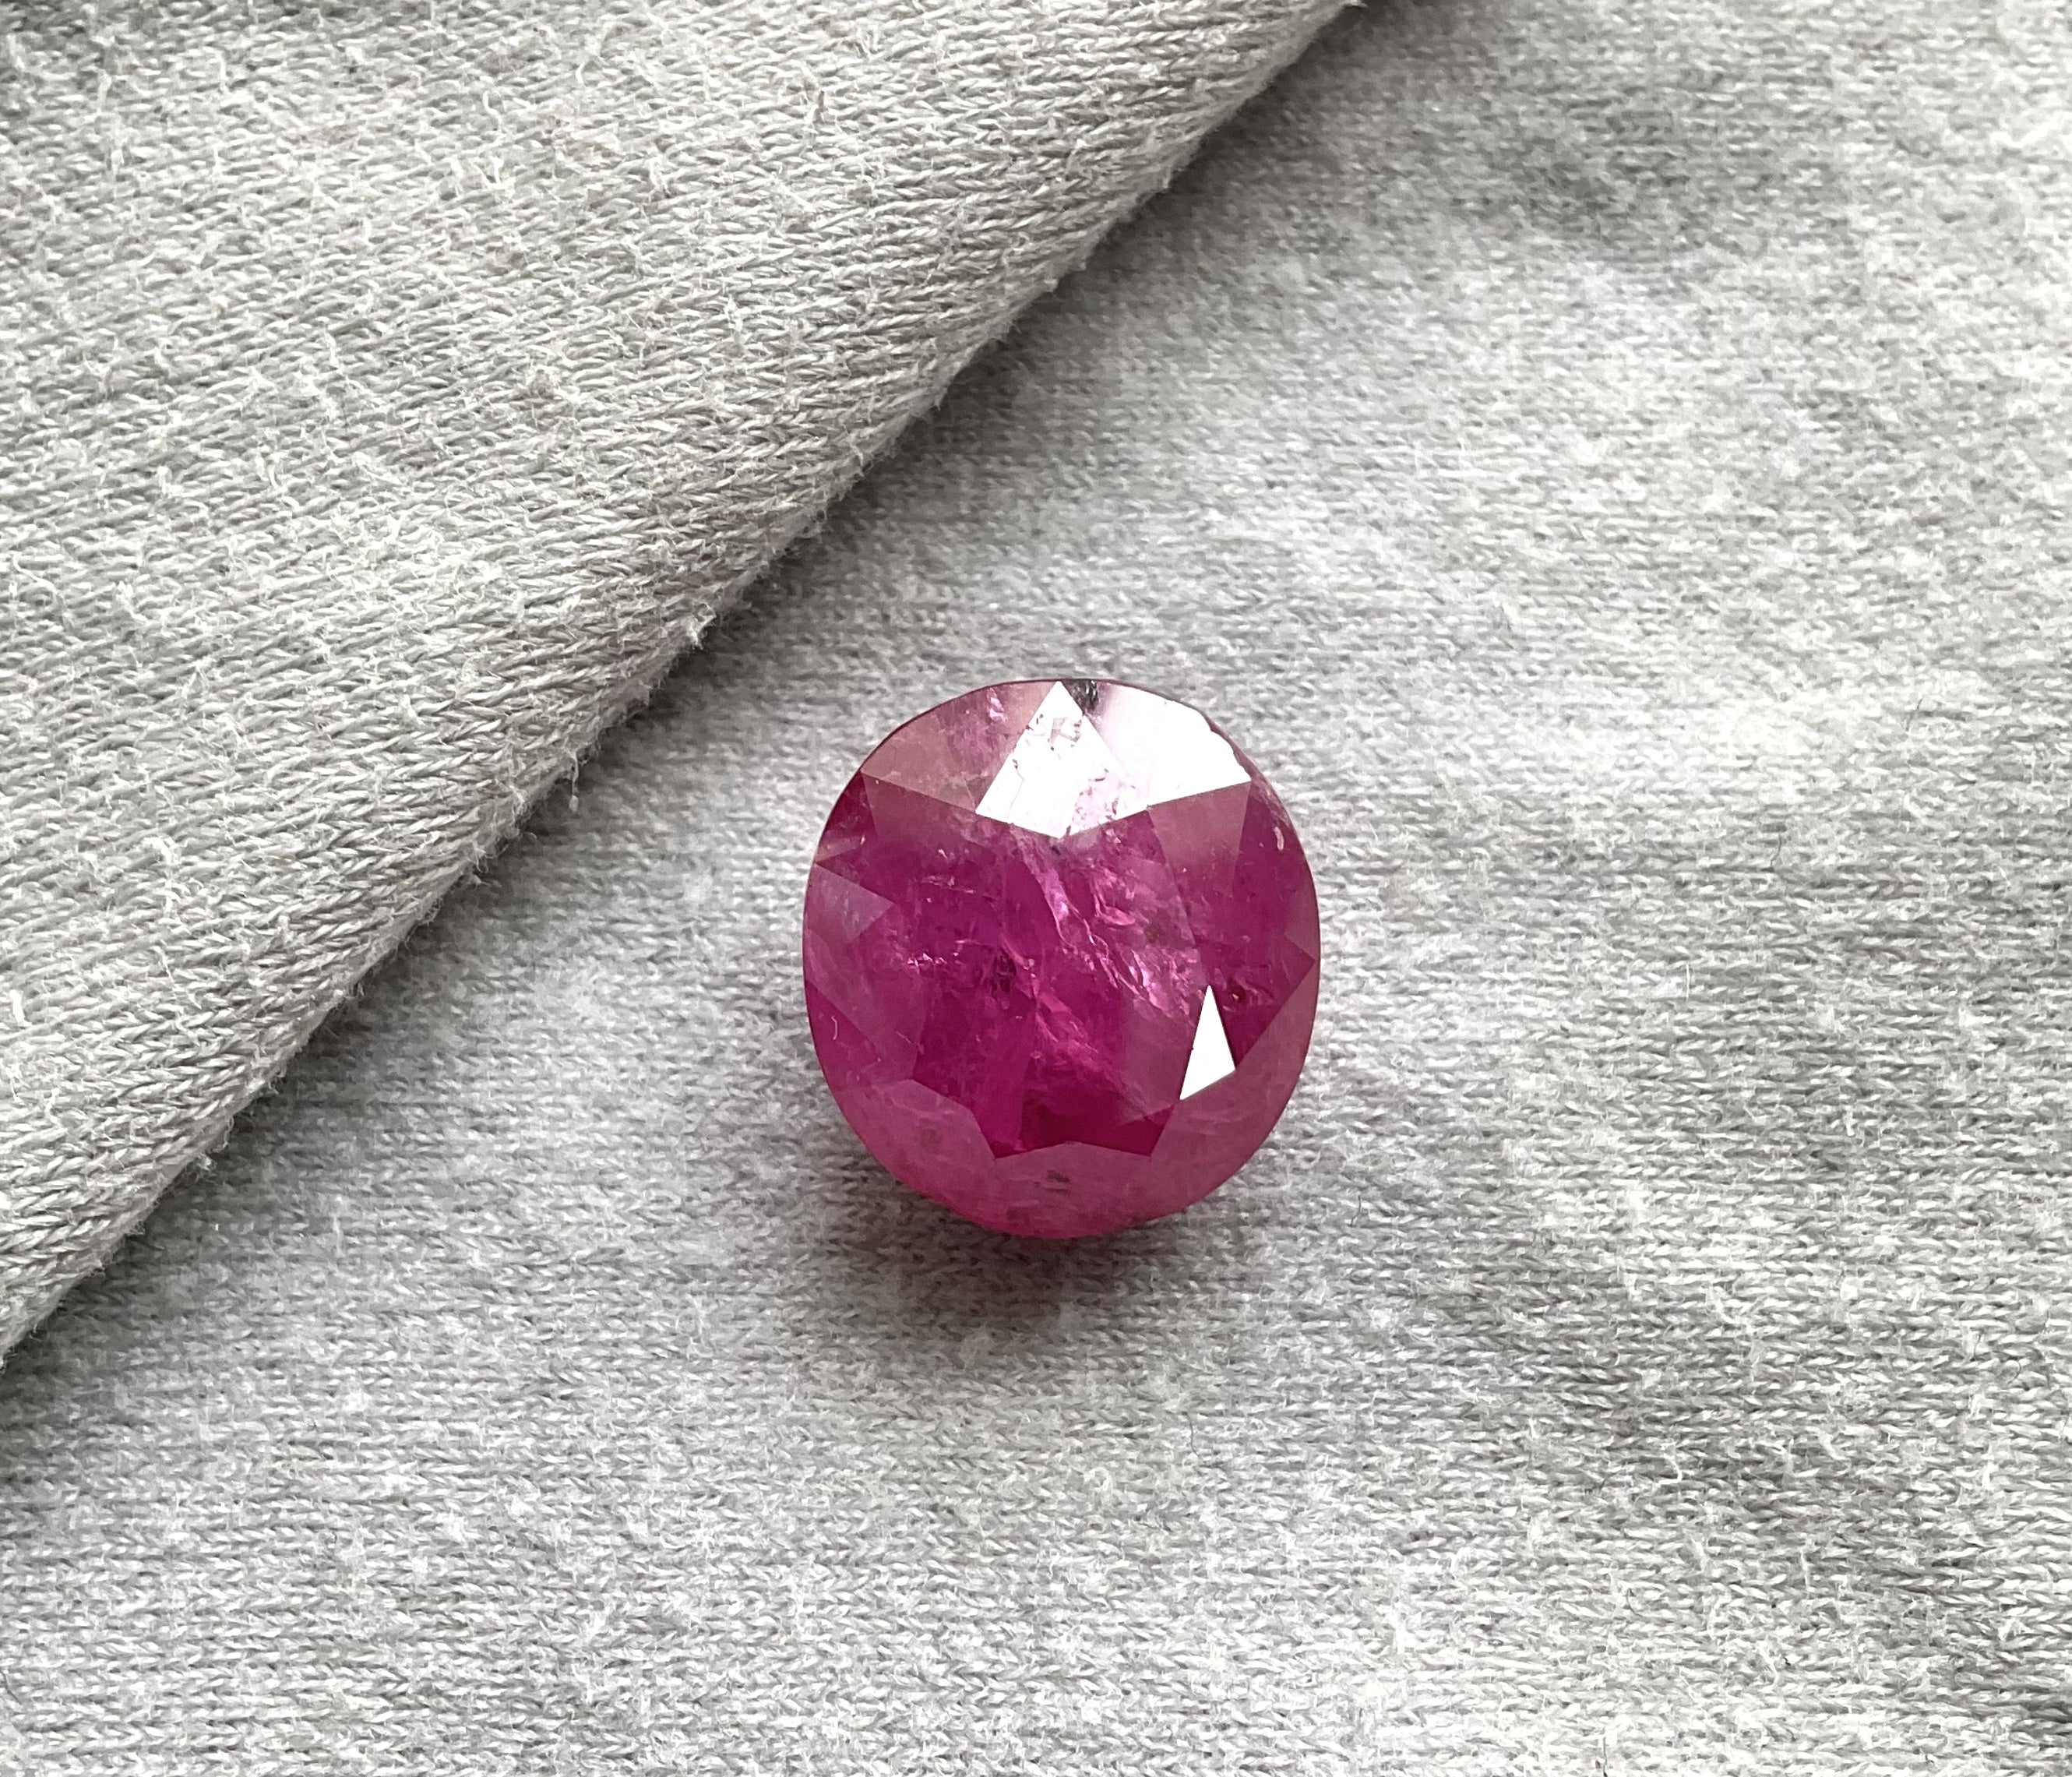 Very Rare Burmese Myanmar ruby no heat no treatment
Weight: 22.51 Carats
Size: 16x14.5x11 MM
Pieces: 1
Shape: Faceted Oval Cut stone